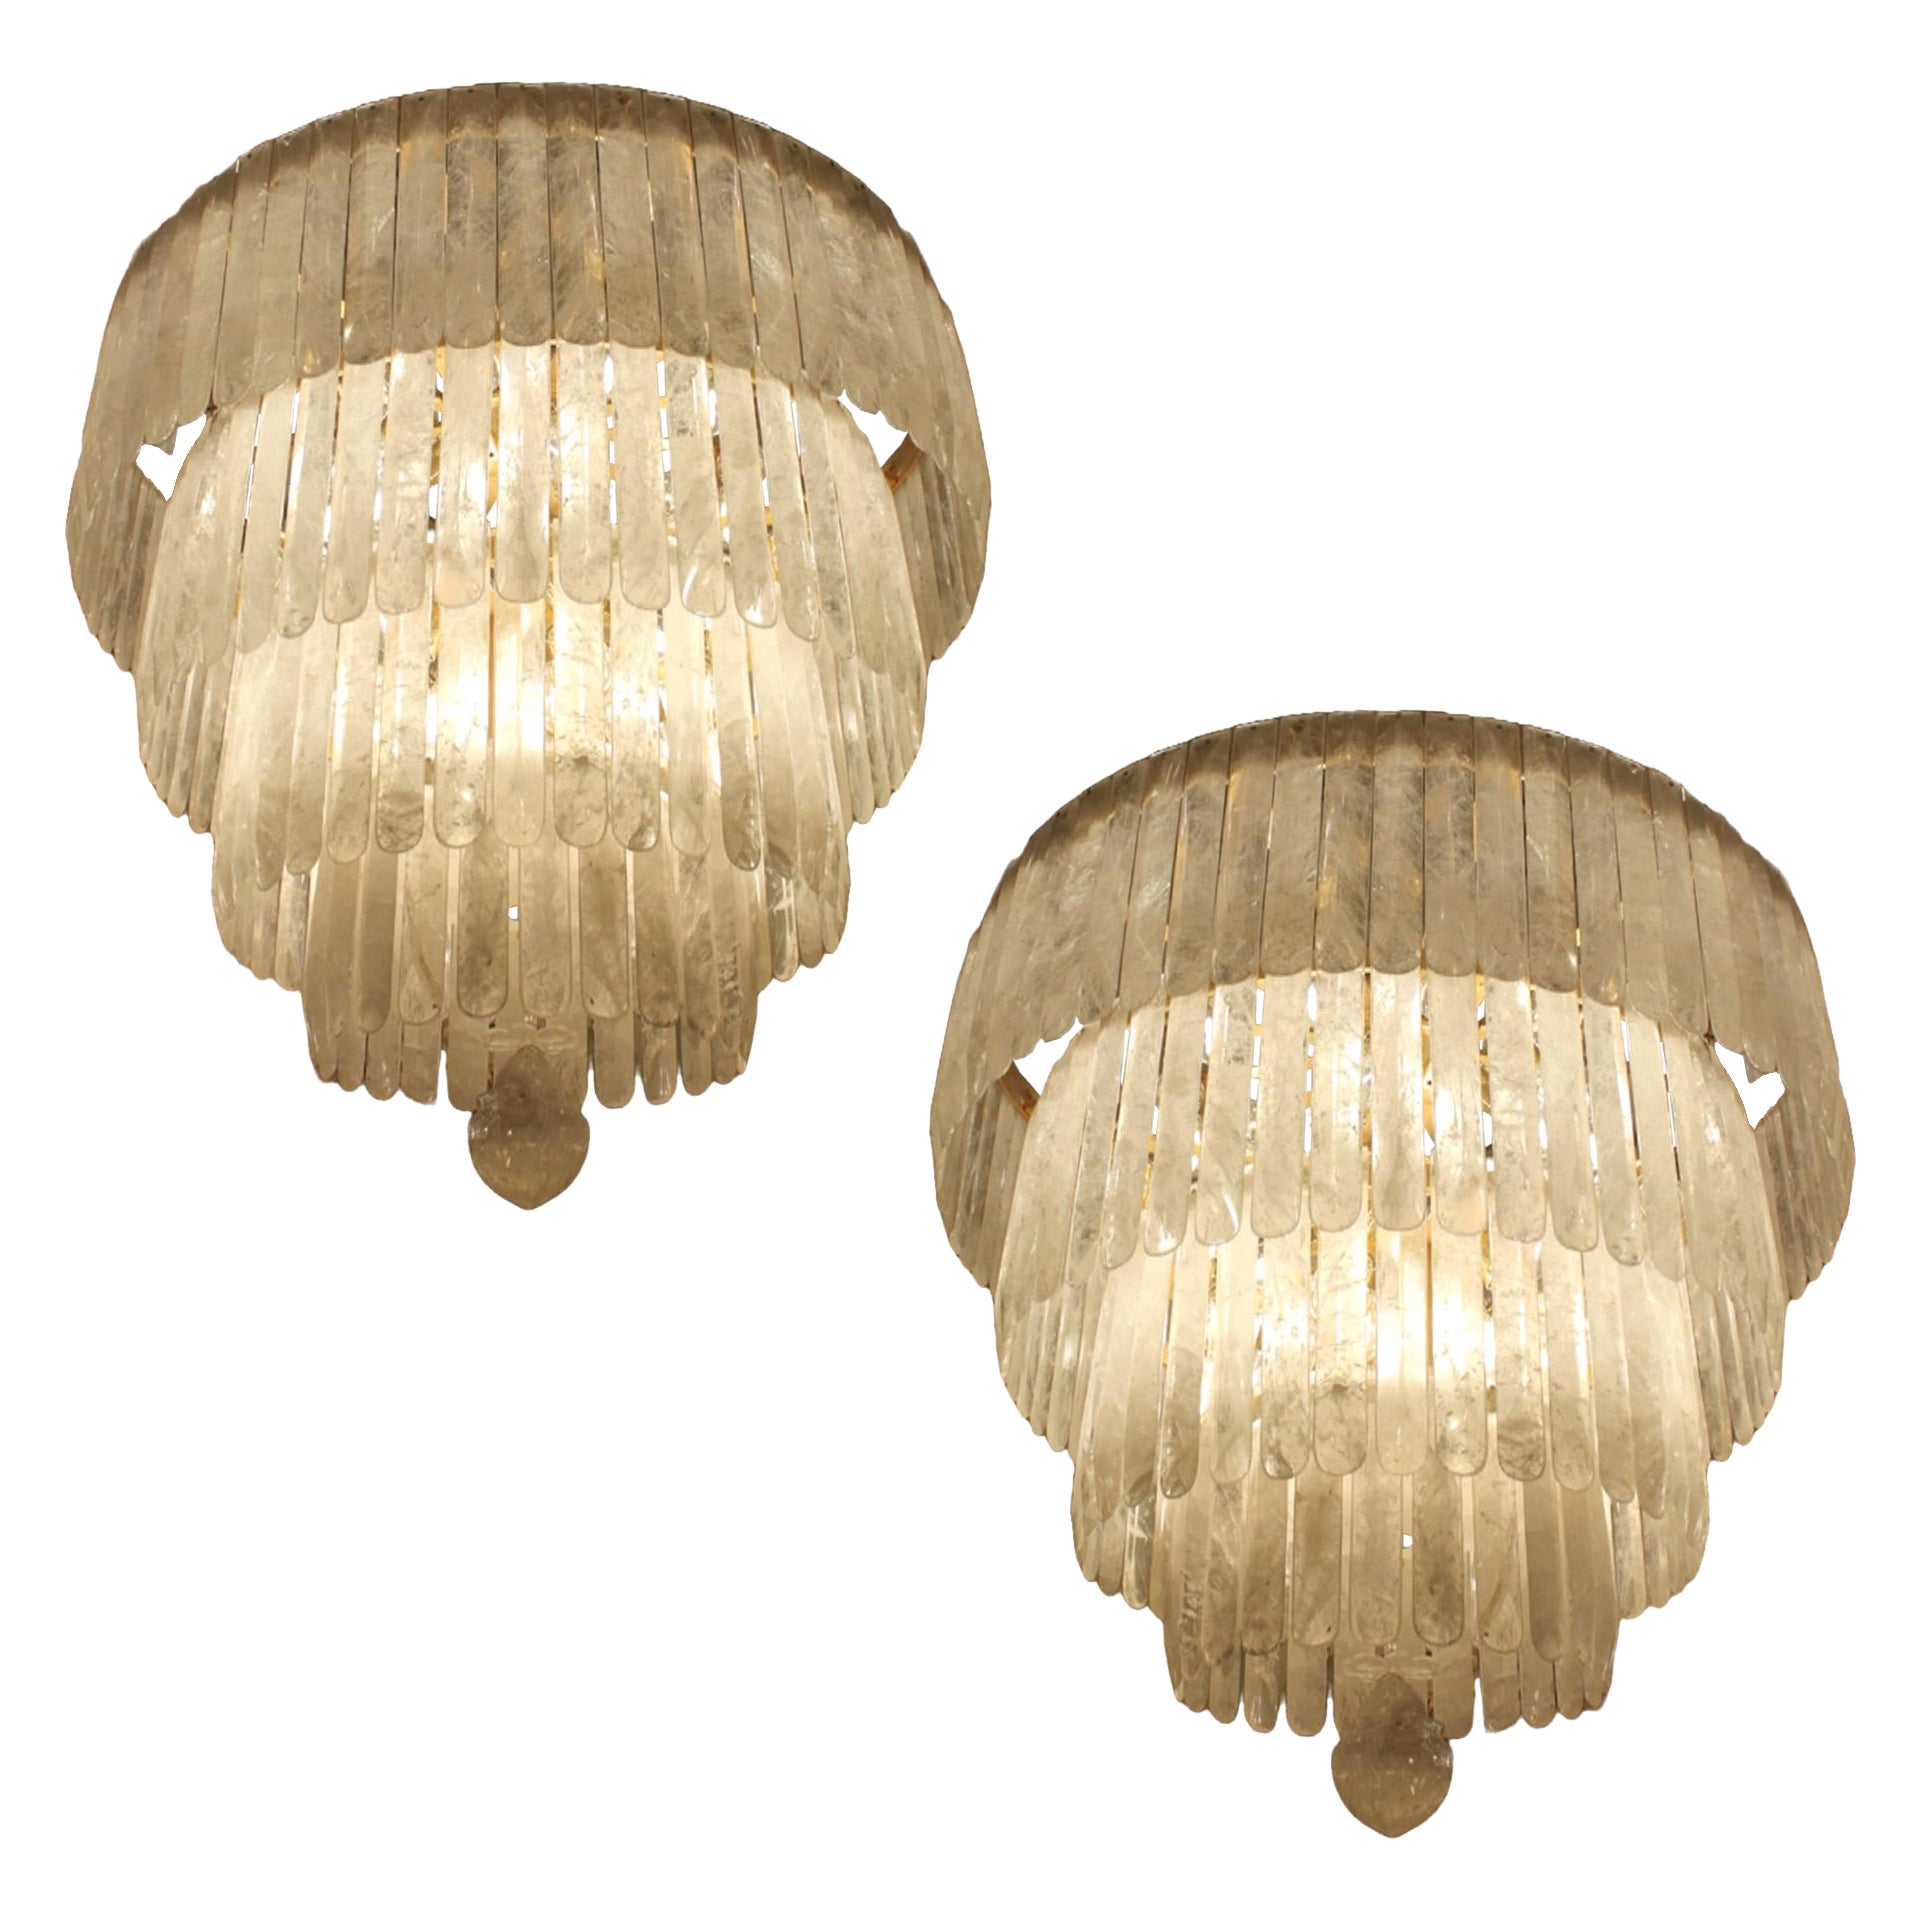  Uniqe exceptional pair of rock crystal chandeliers For Sale